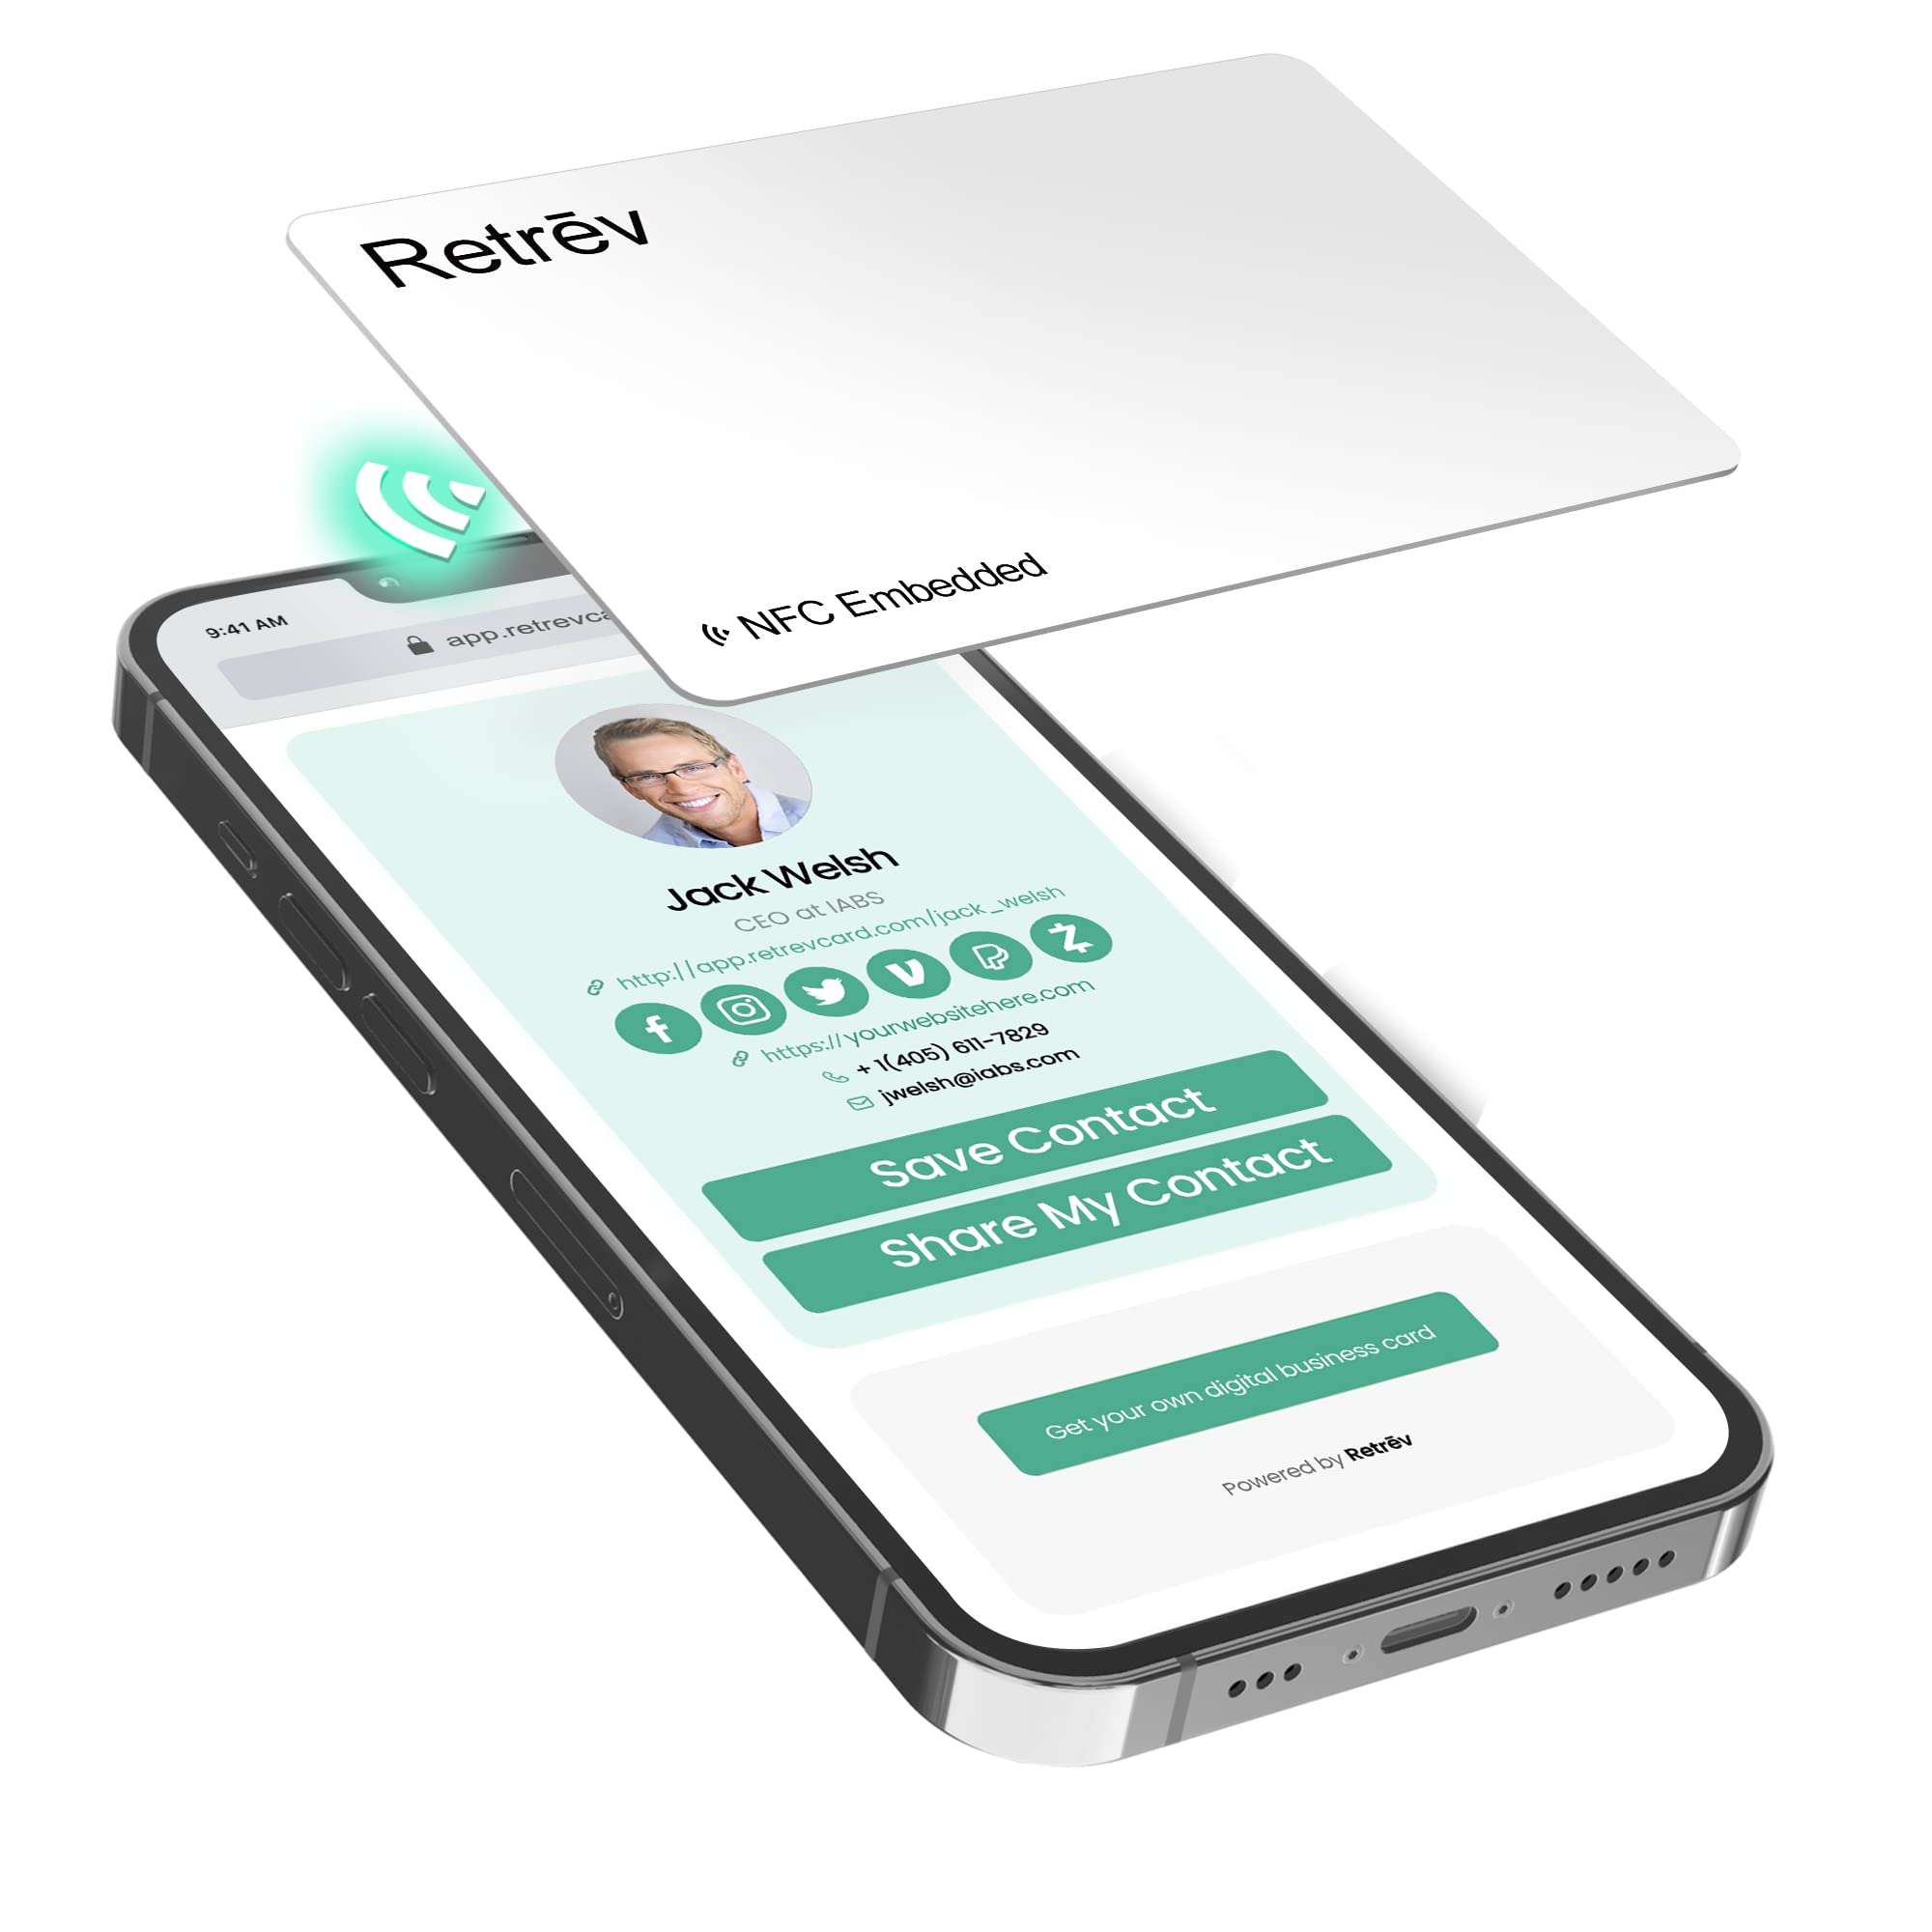 Retrev Digital Business and Networking card, White, NFc Instant contact  QR Scan - Transfer contact, Website, or Social Media In